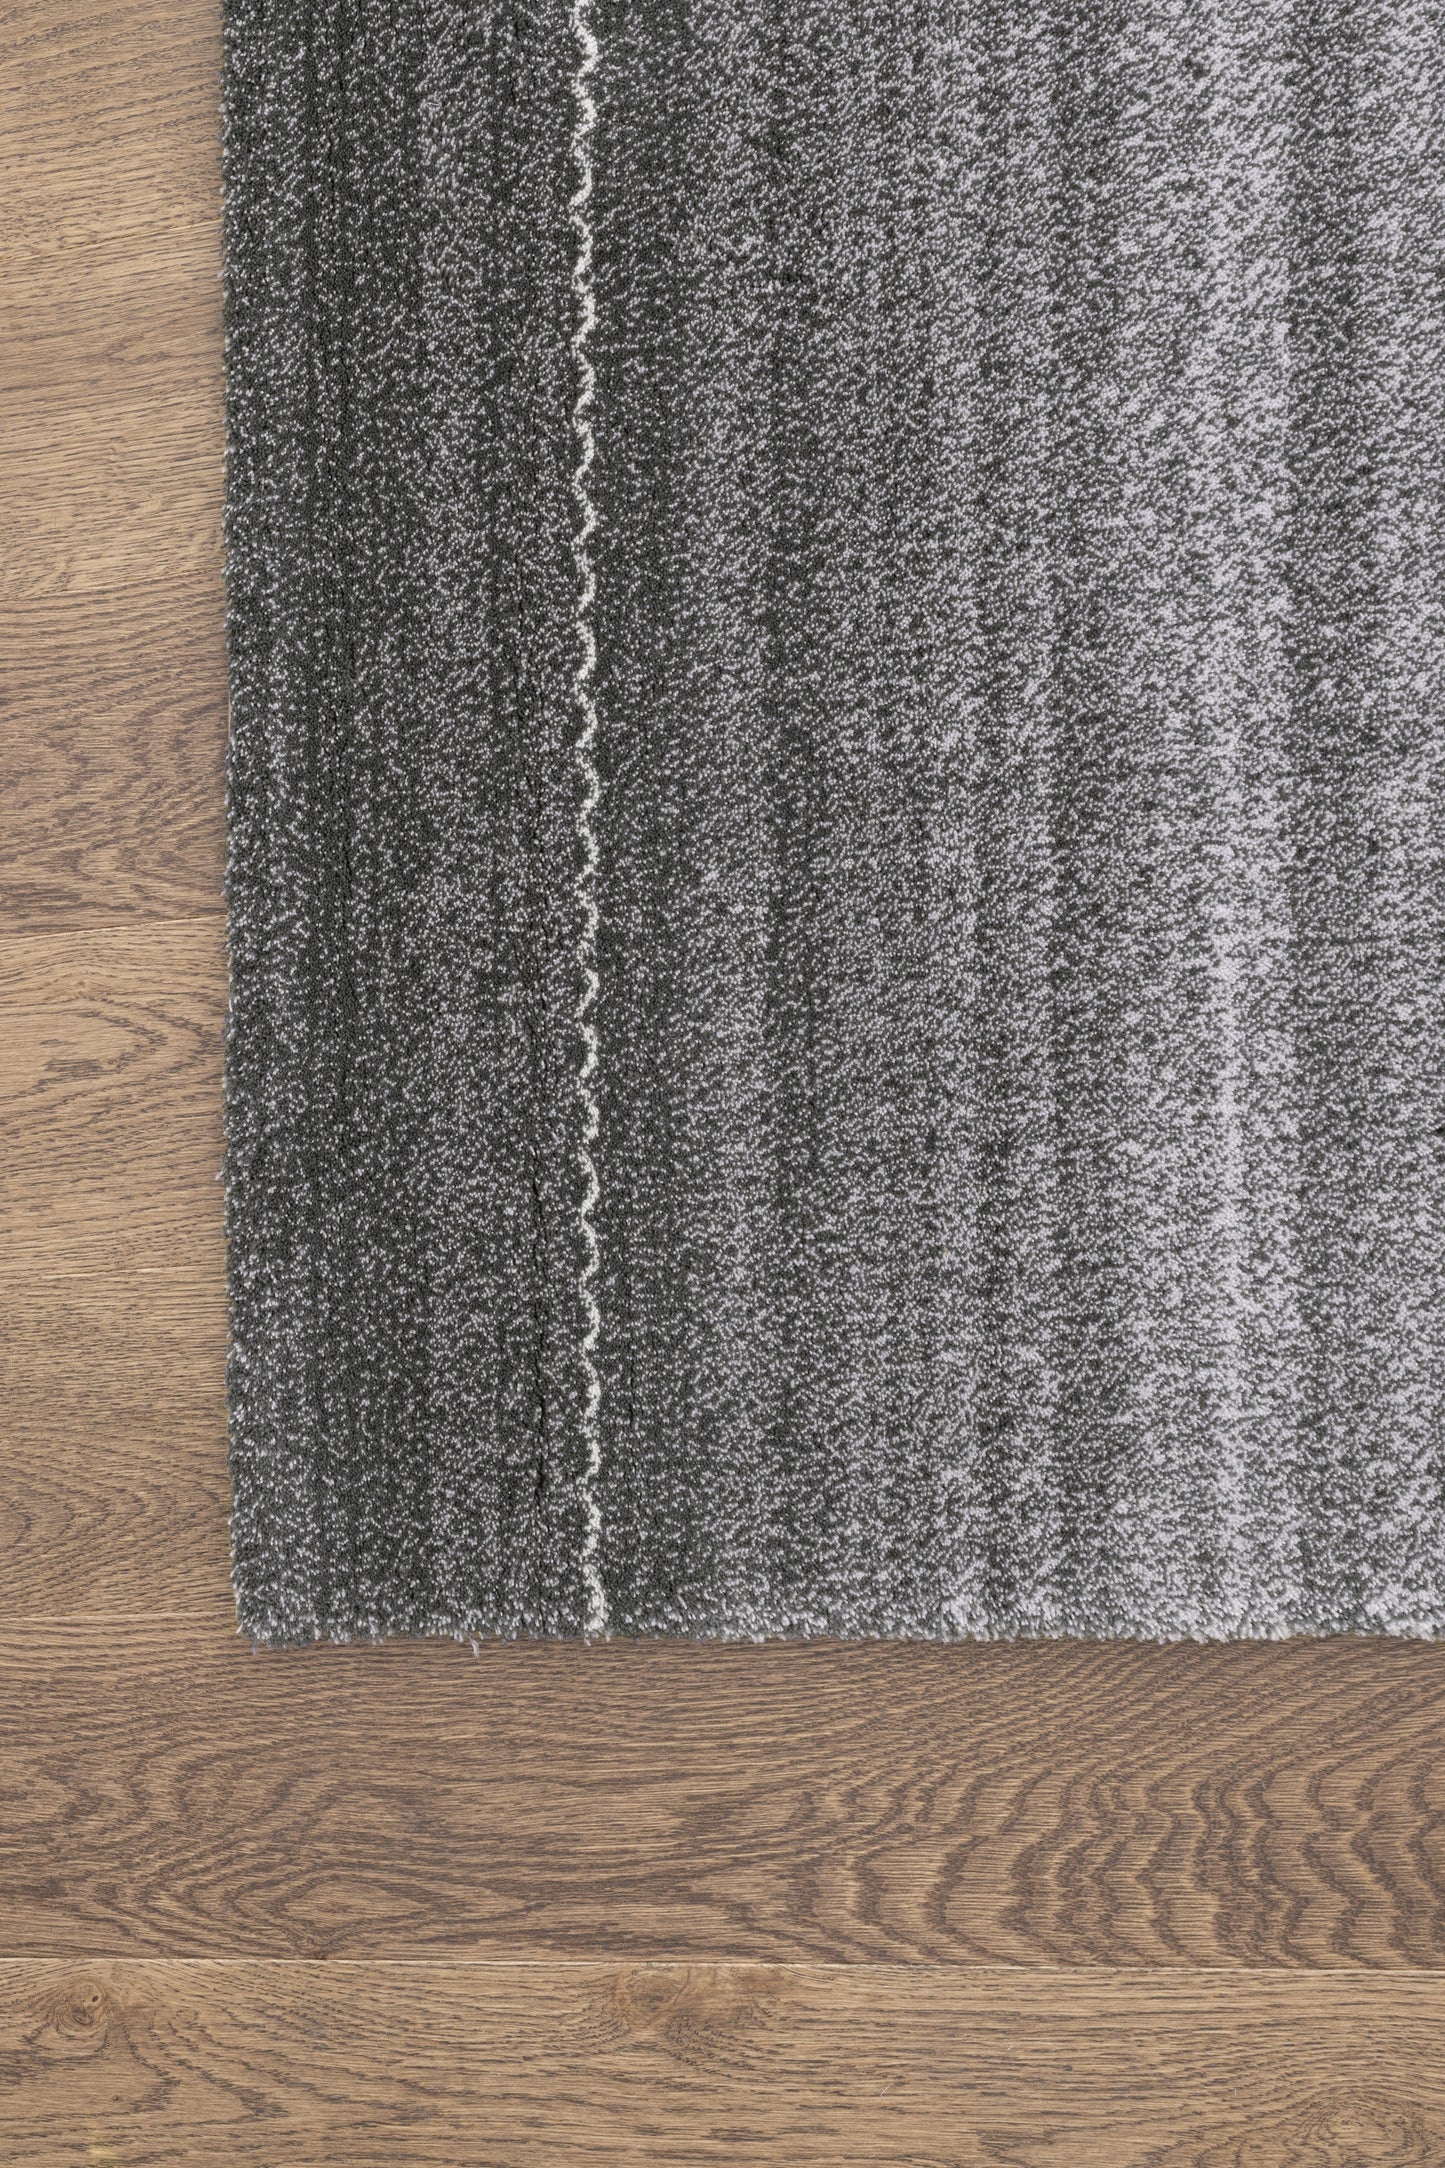 Agnella Rugs Calisia BEVERLY Light Grey - 100% New Zealand Wool - Free Delivery